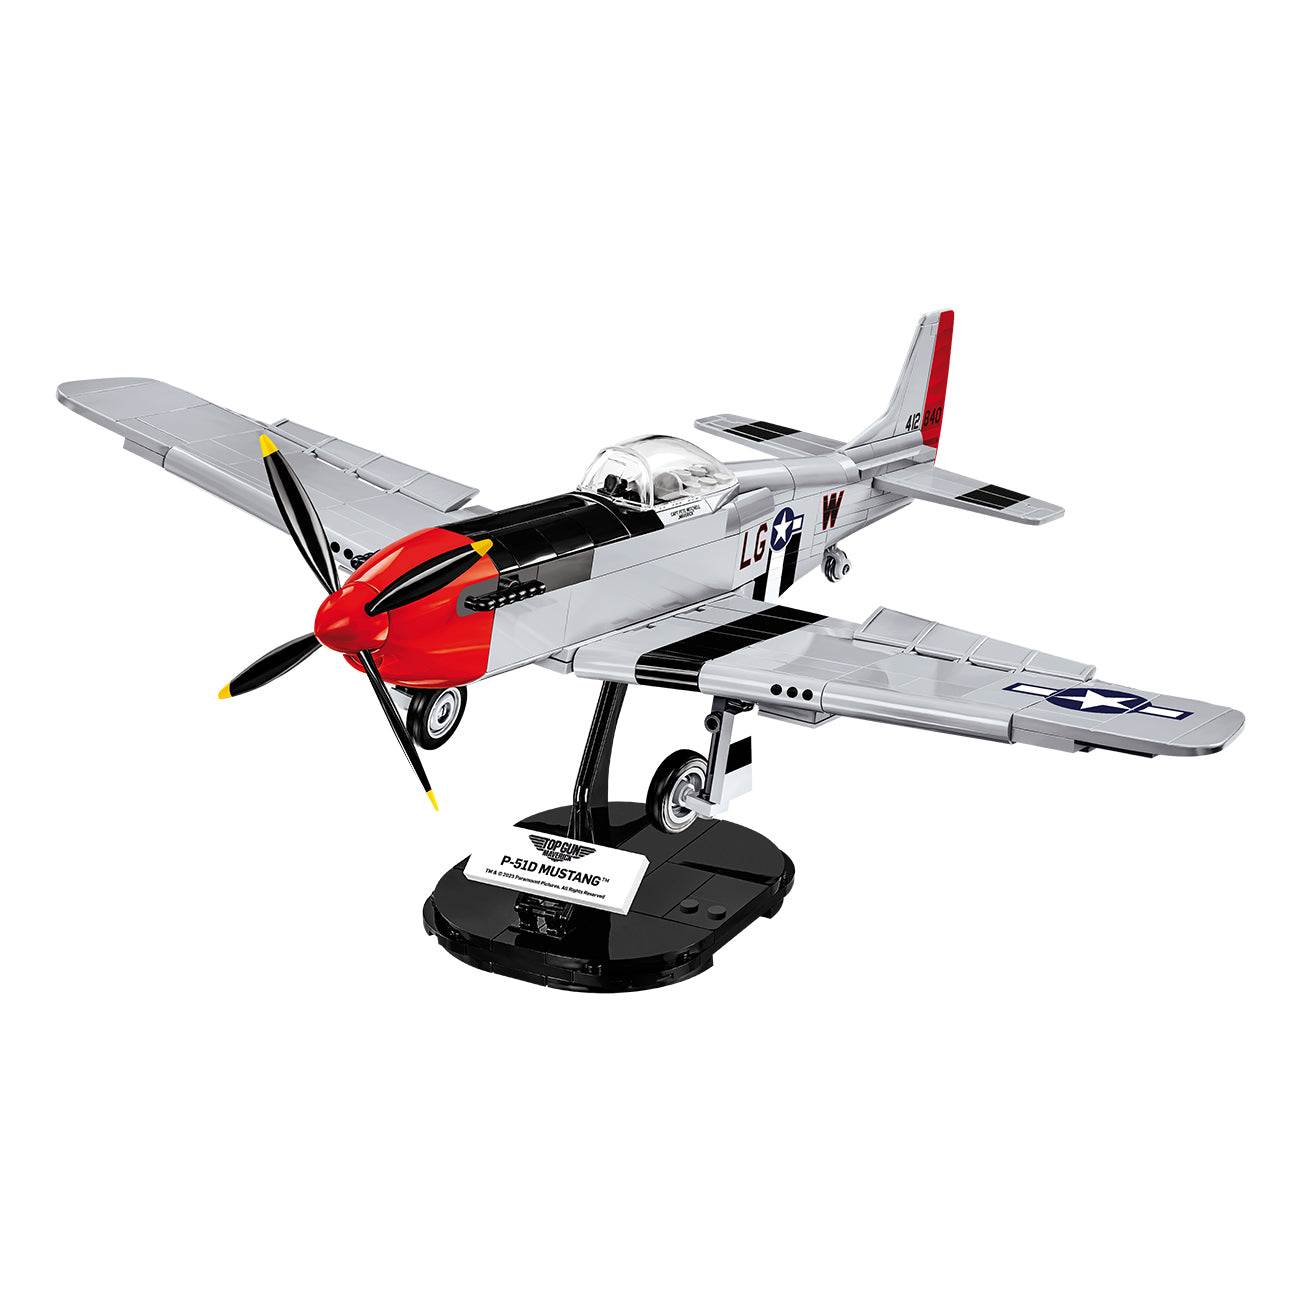 P-51 Mustang RC Plane Build and Fly 